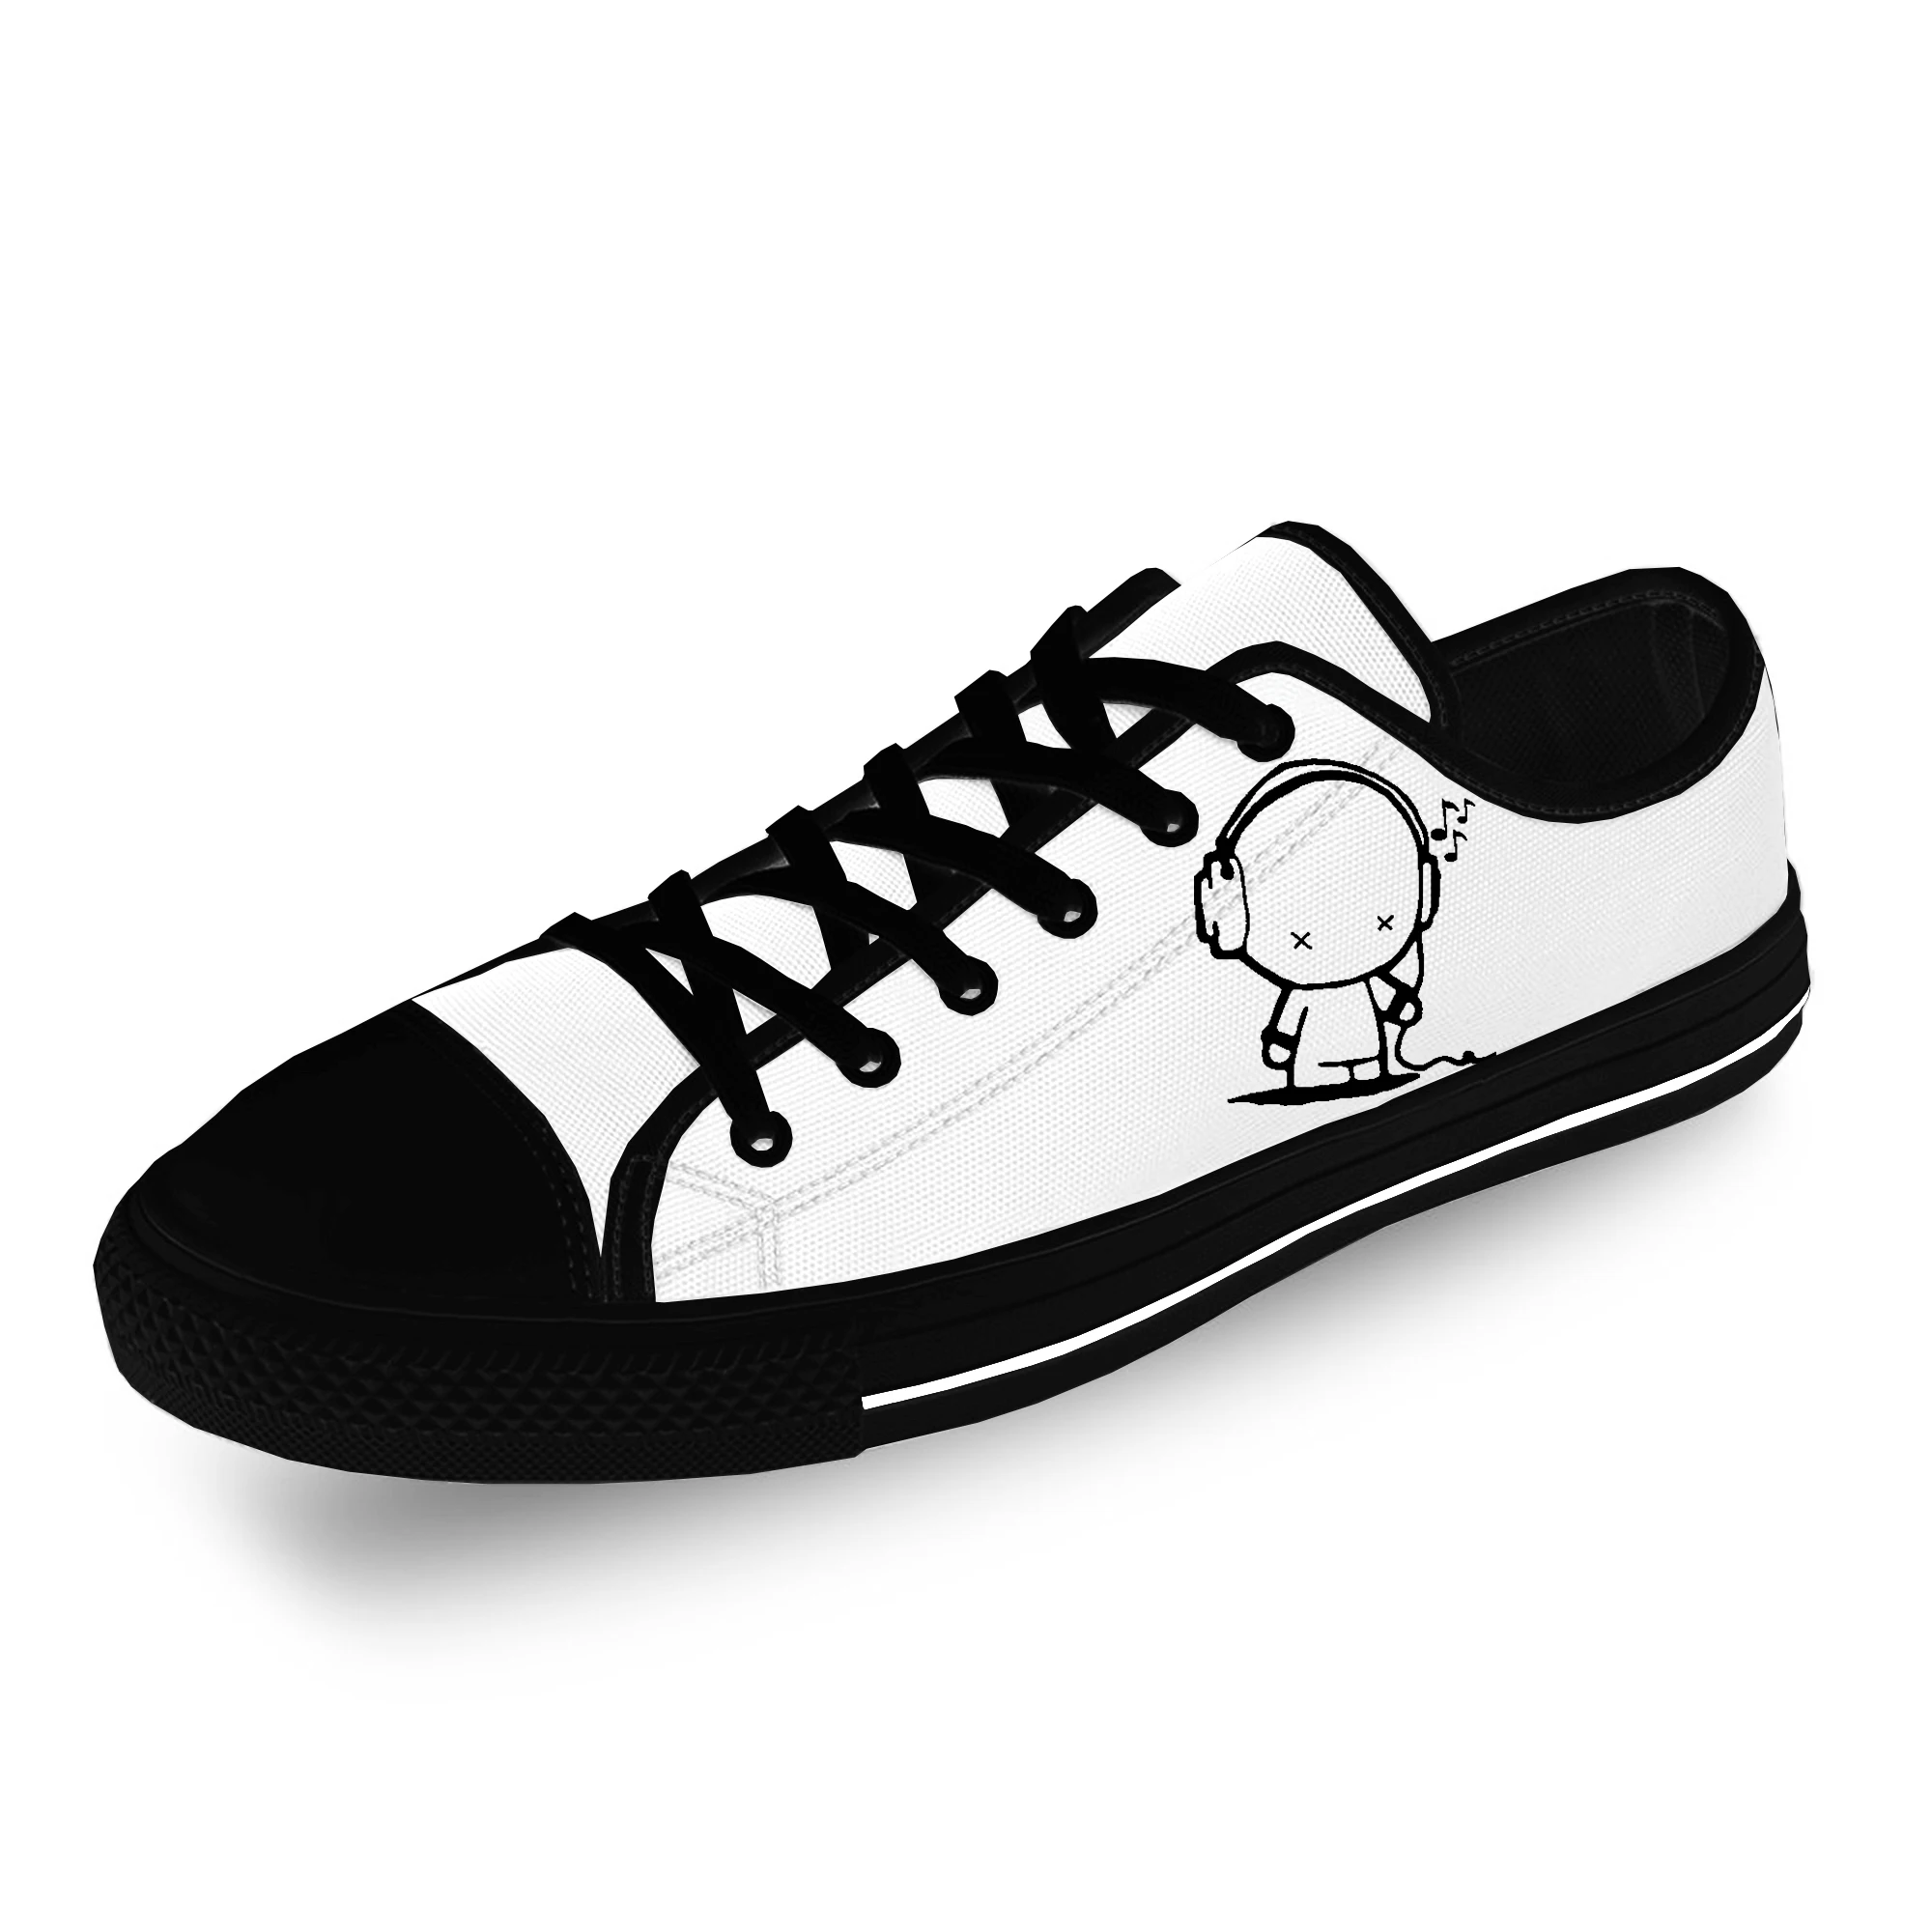 Headset Cartoon Music Rock Cool Casual Cloth Fashion 3D Print Low Top Canvas Shoes Men Women Lightweight Breathable Sneakers